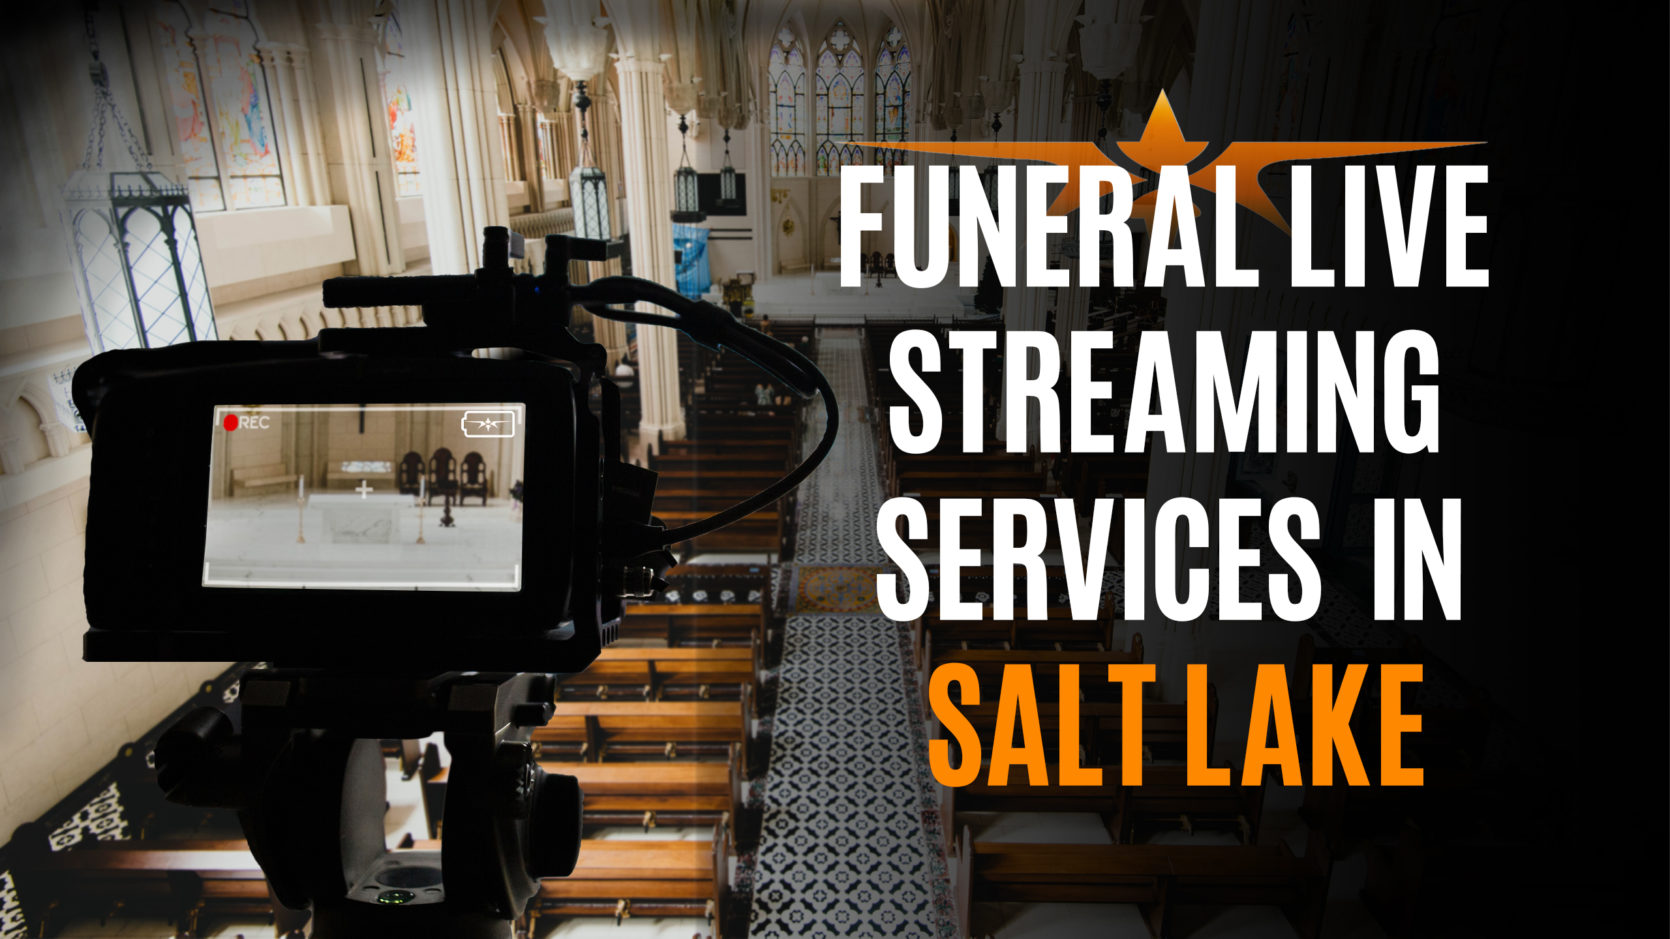 Funeral Live Streaming Services in Salt Lake